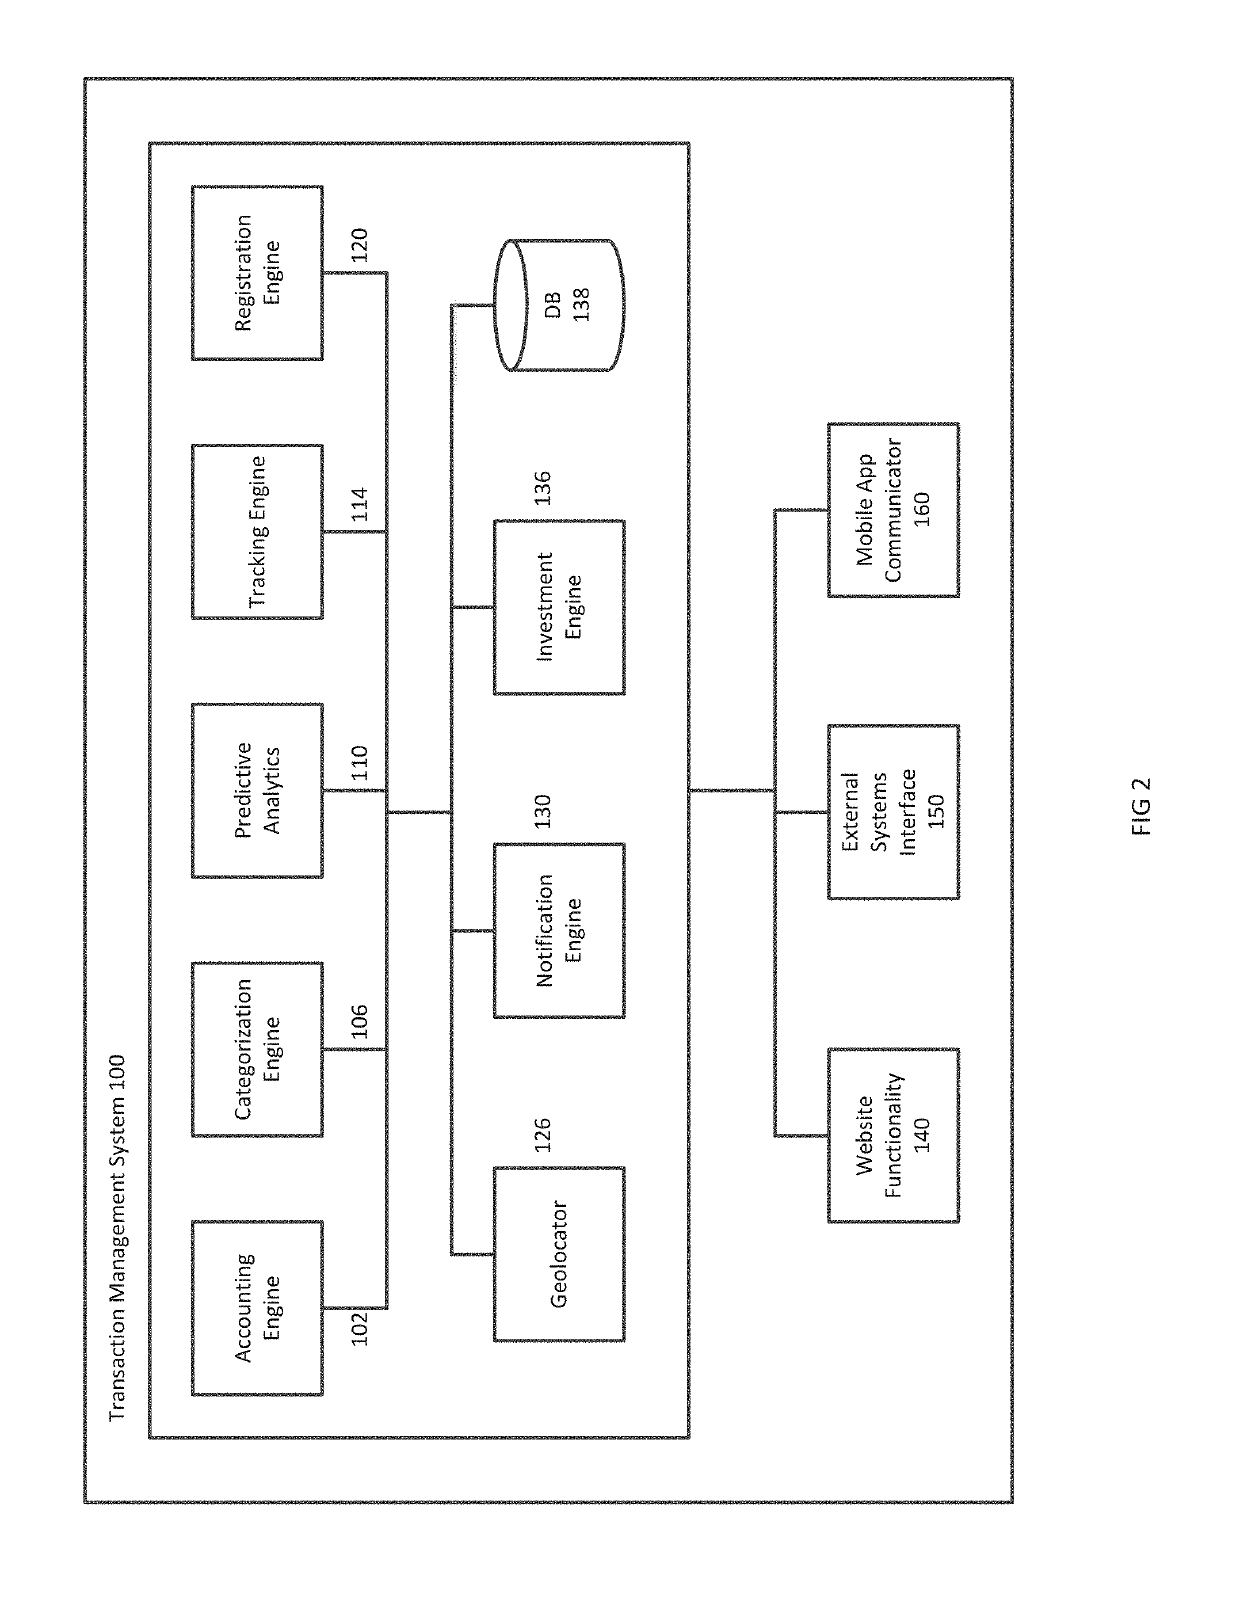 System and Method for Spend Management and Investment of Funds